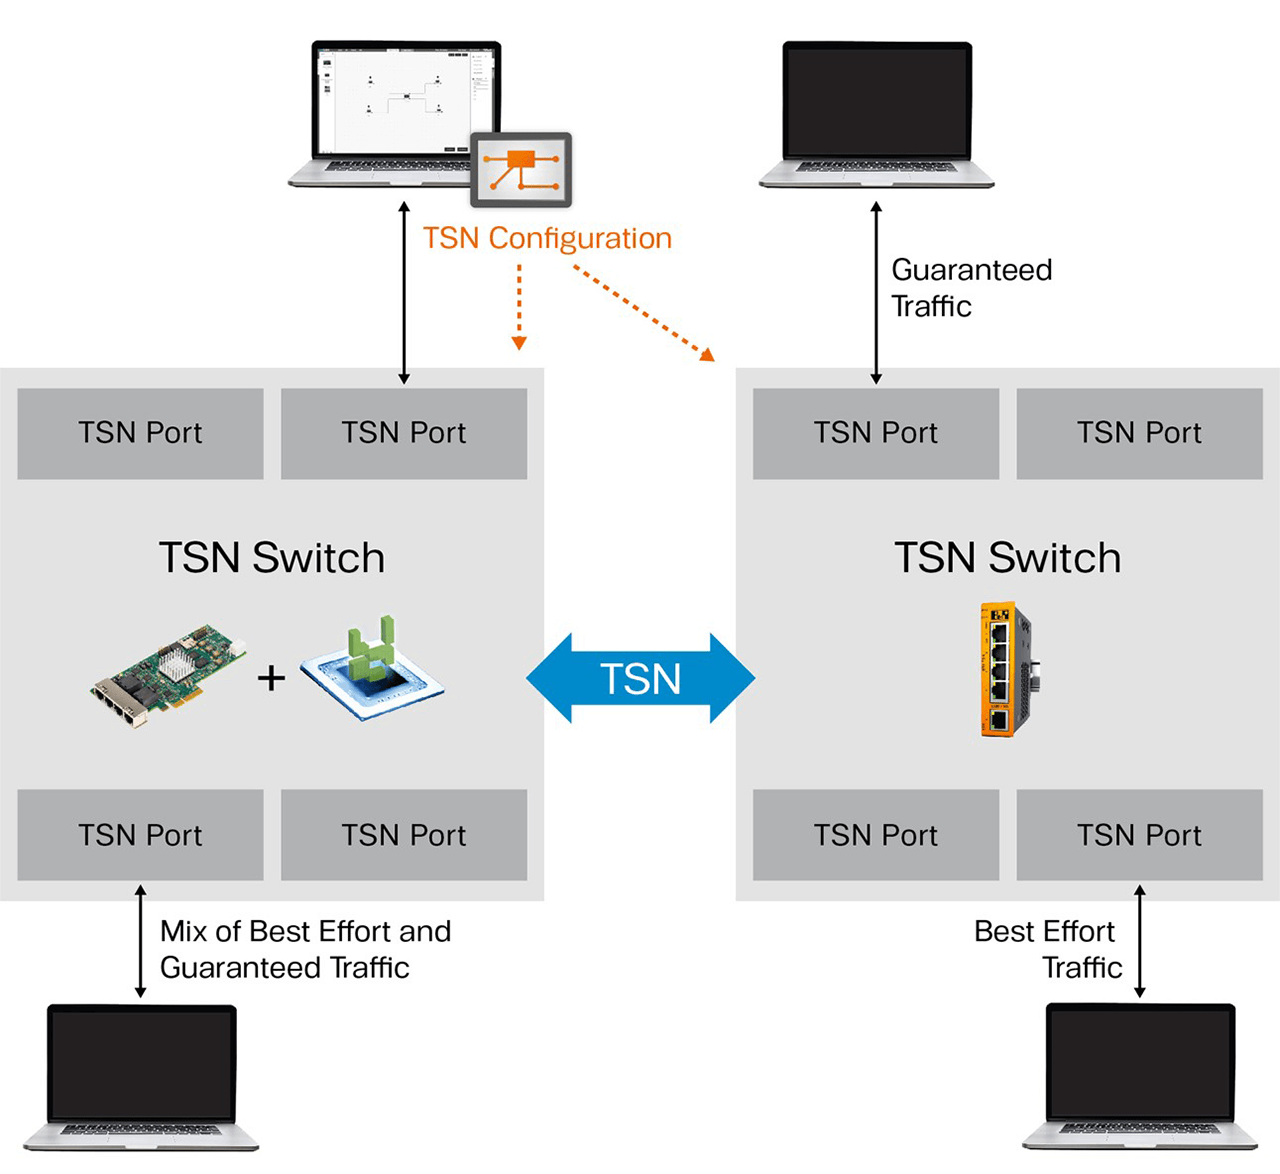 Typical TSN network setup with different switch providers, enabling standard-compliant planning and configuration.